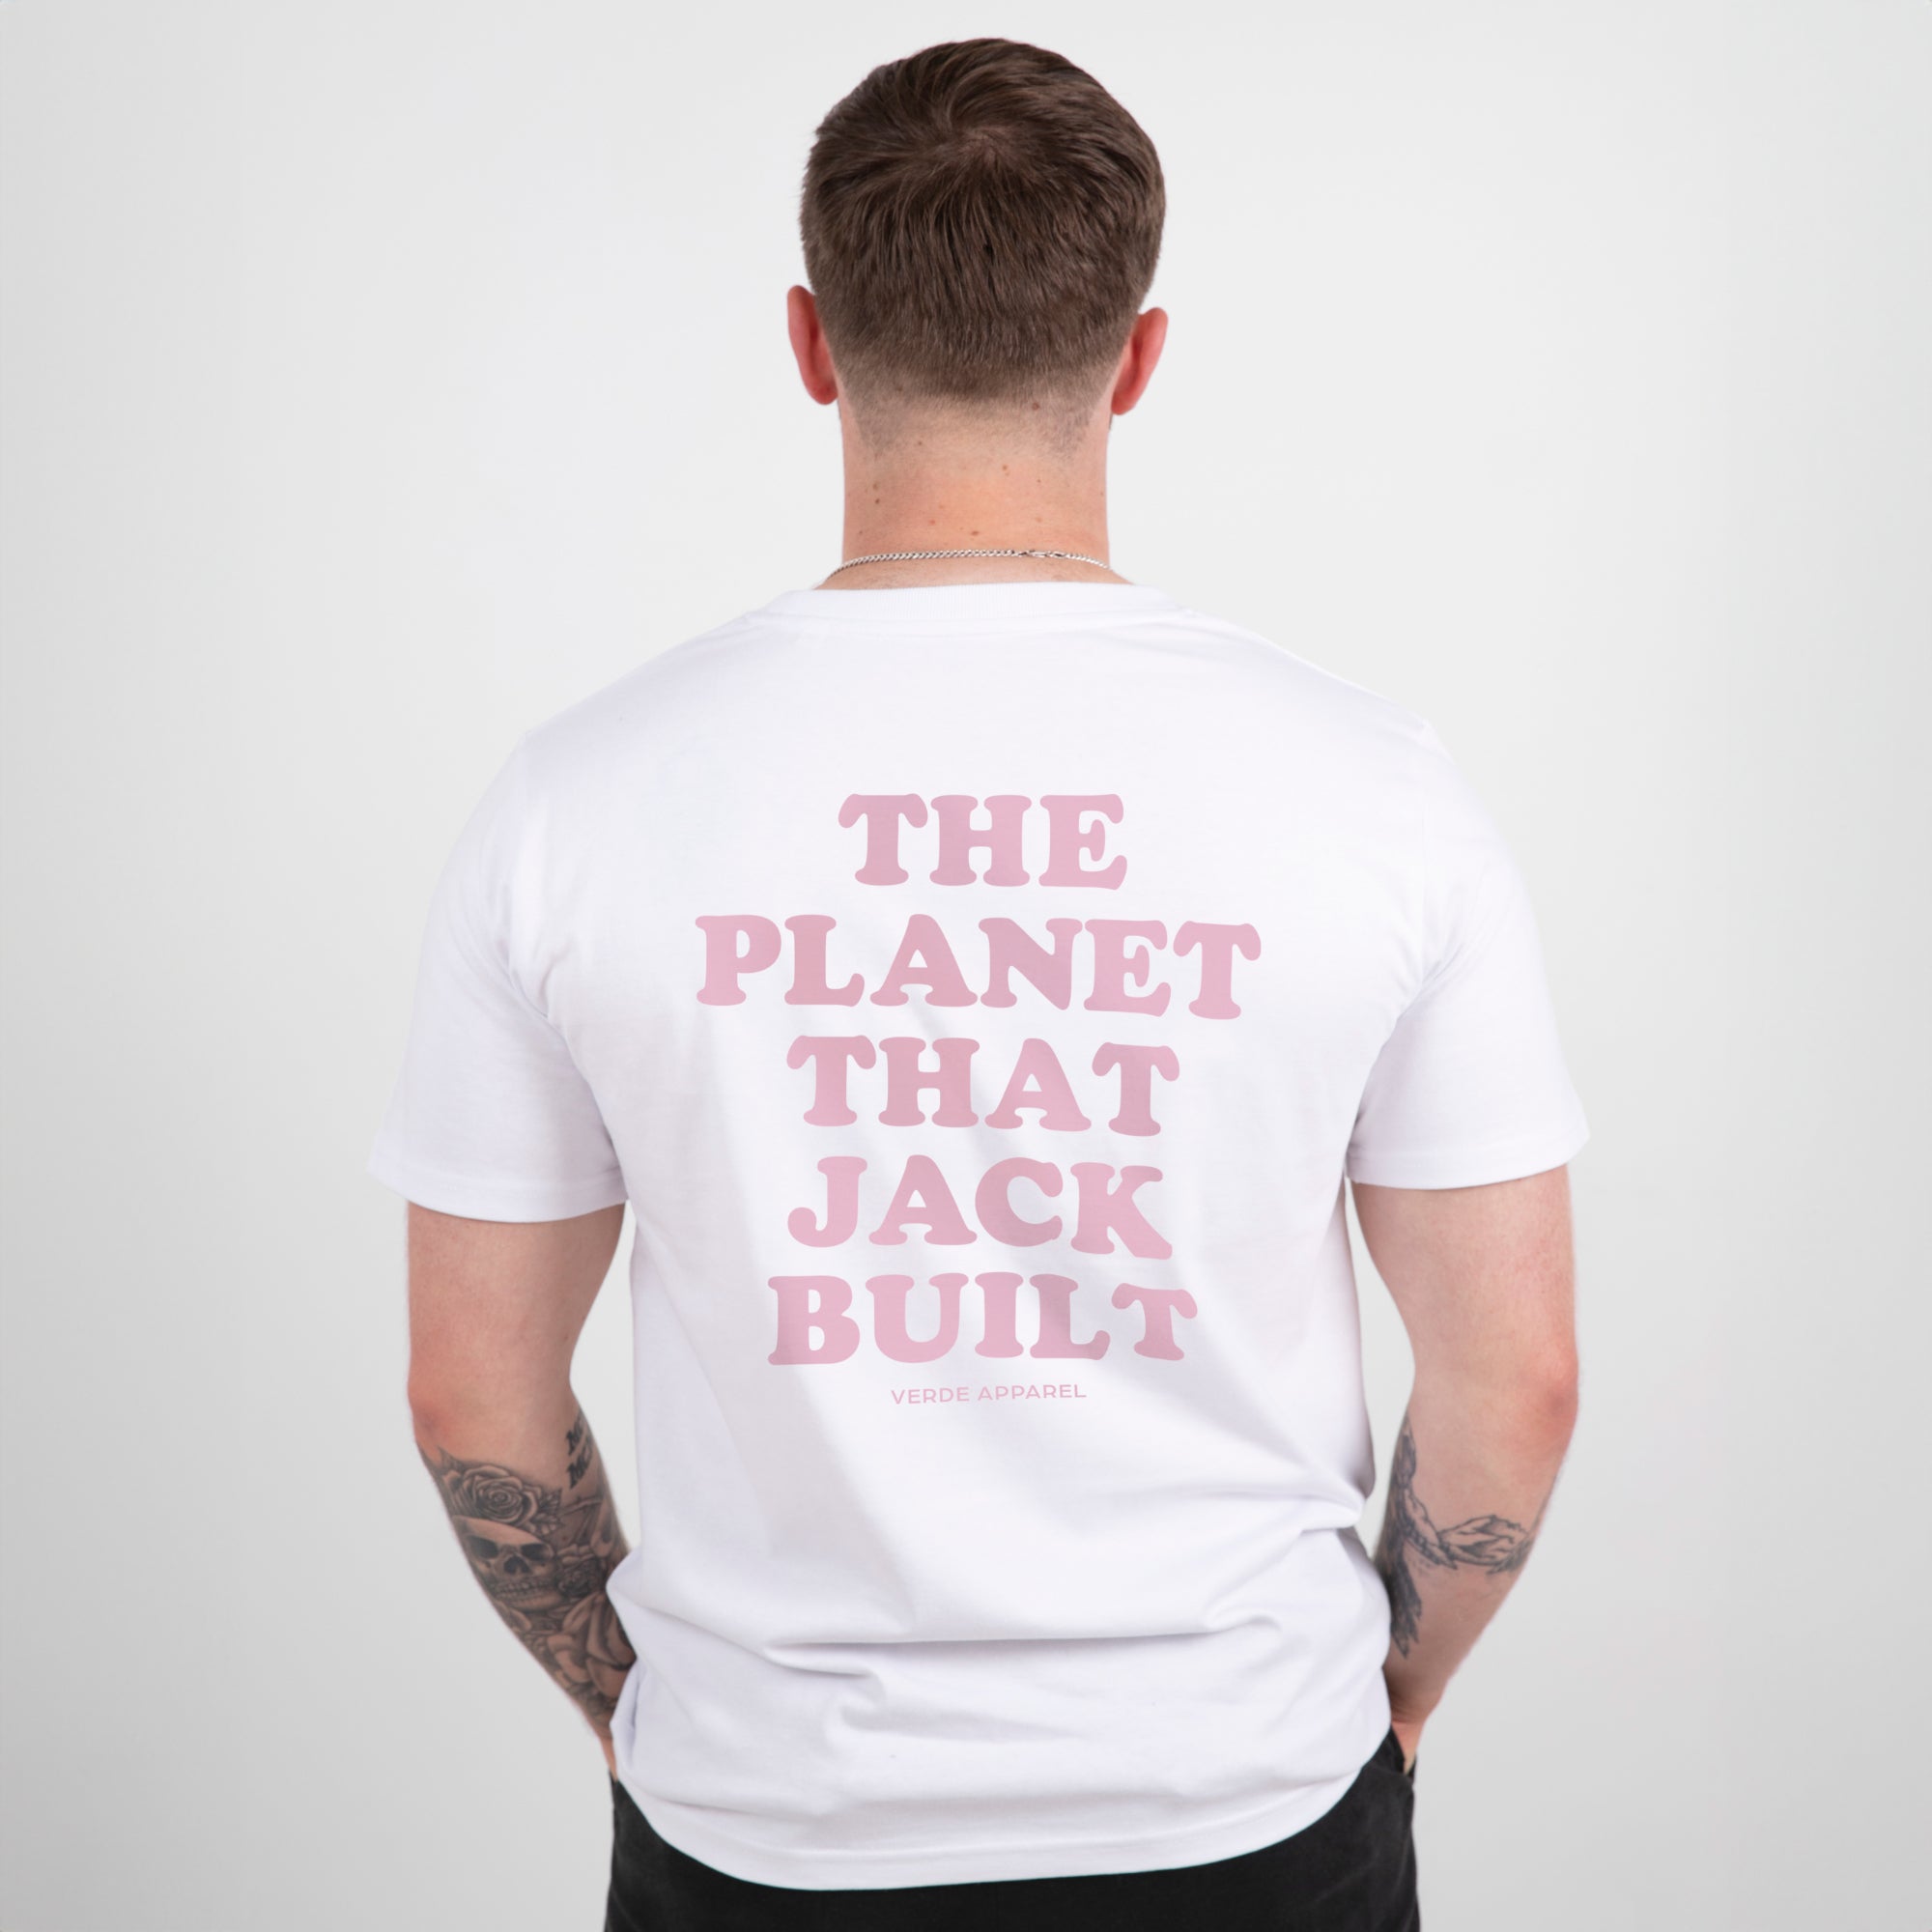 The Planet That Jack Built Tee